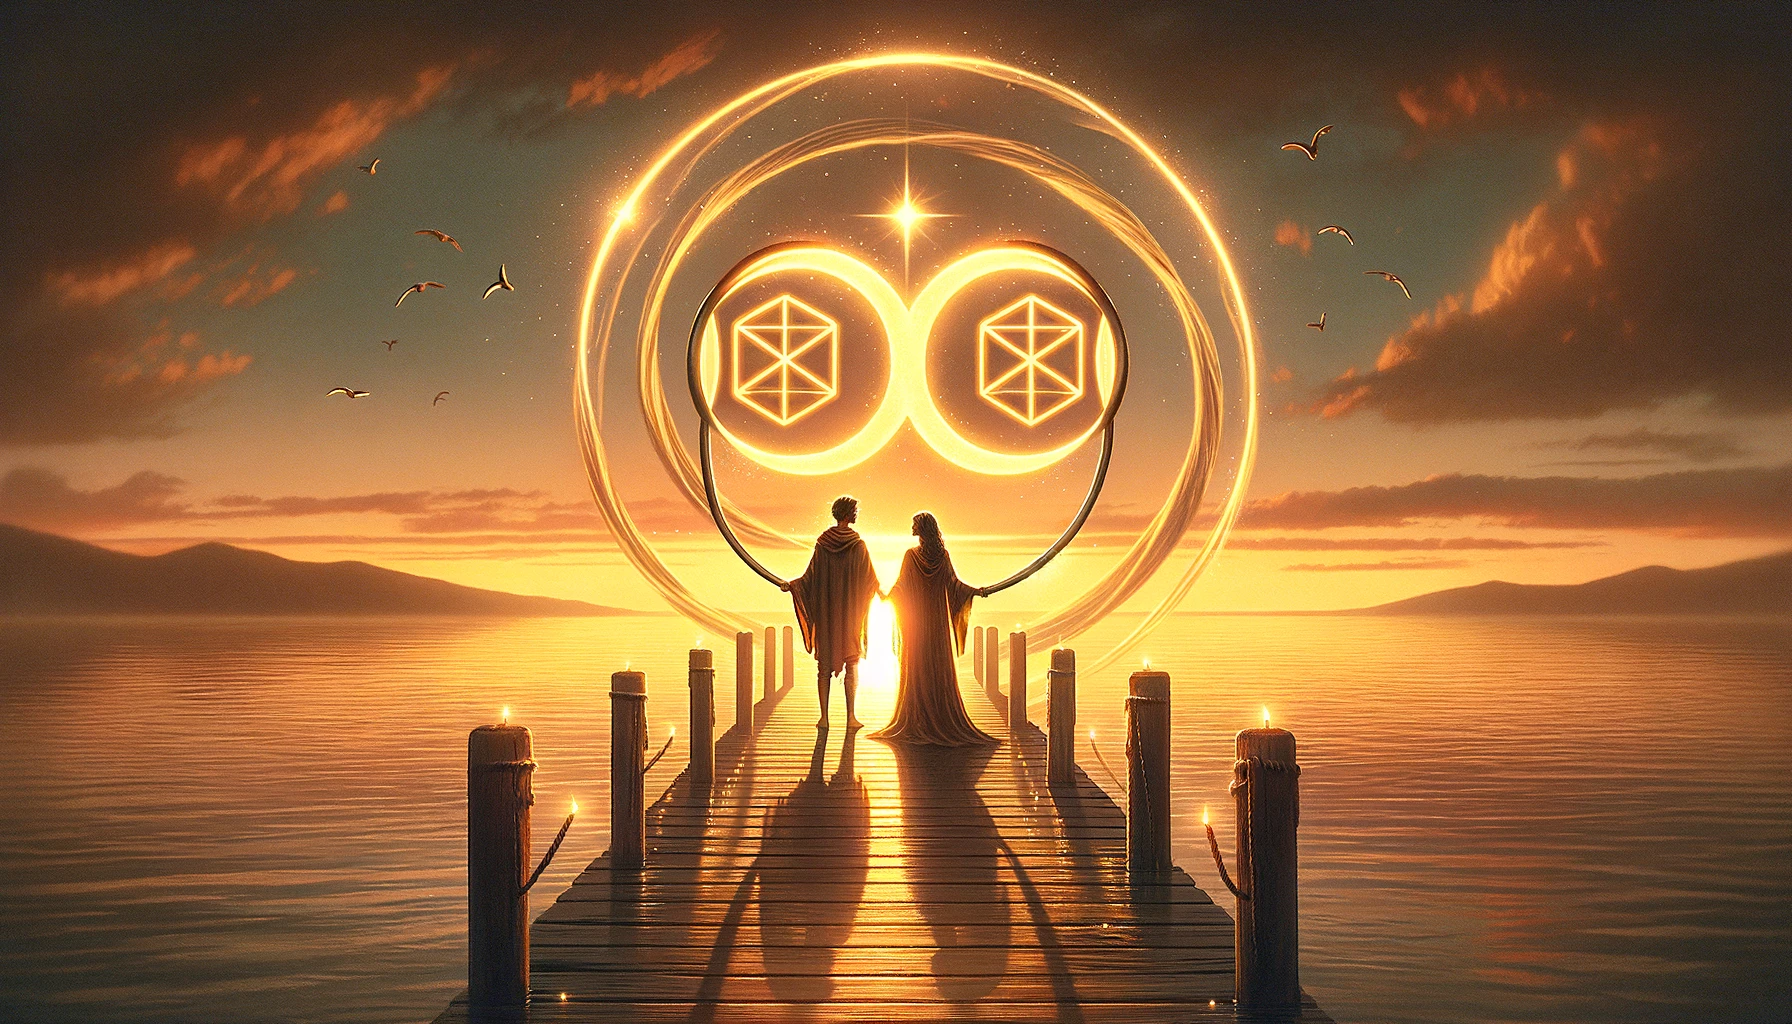 An illustration symbolizing balance and adjustment in a relationship, featuring a couple holding parts of an infinite loop with glowing pentacles, set against a serene sunset backdrop, representing ongoing effort and mutual understanding needed to navigate love's complexities.